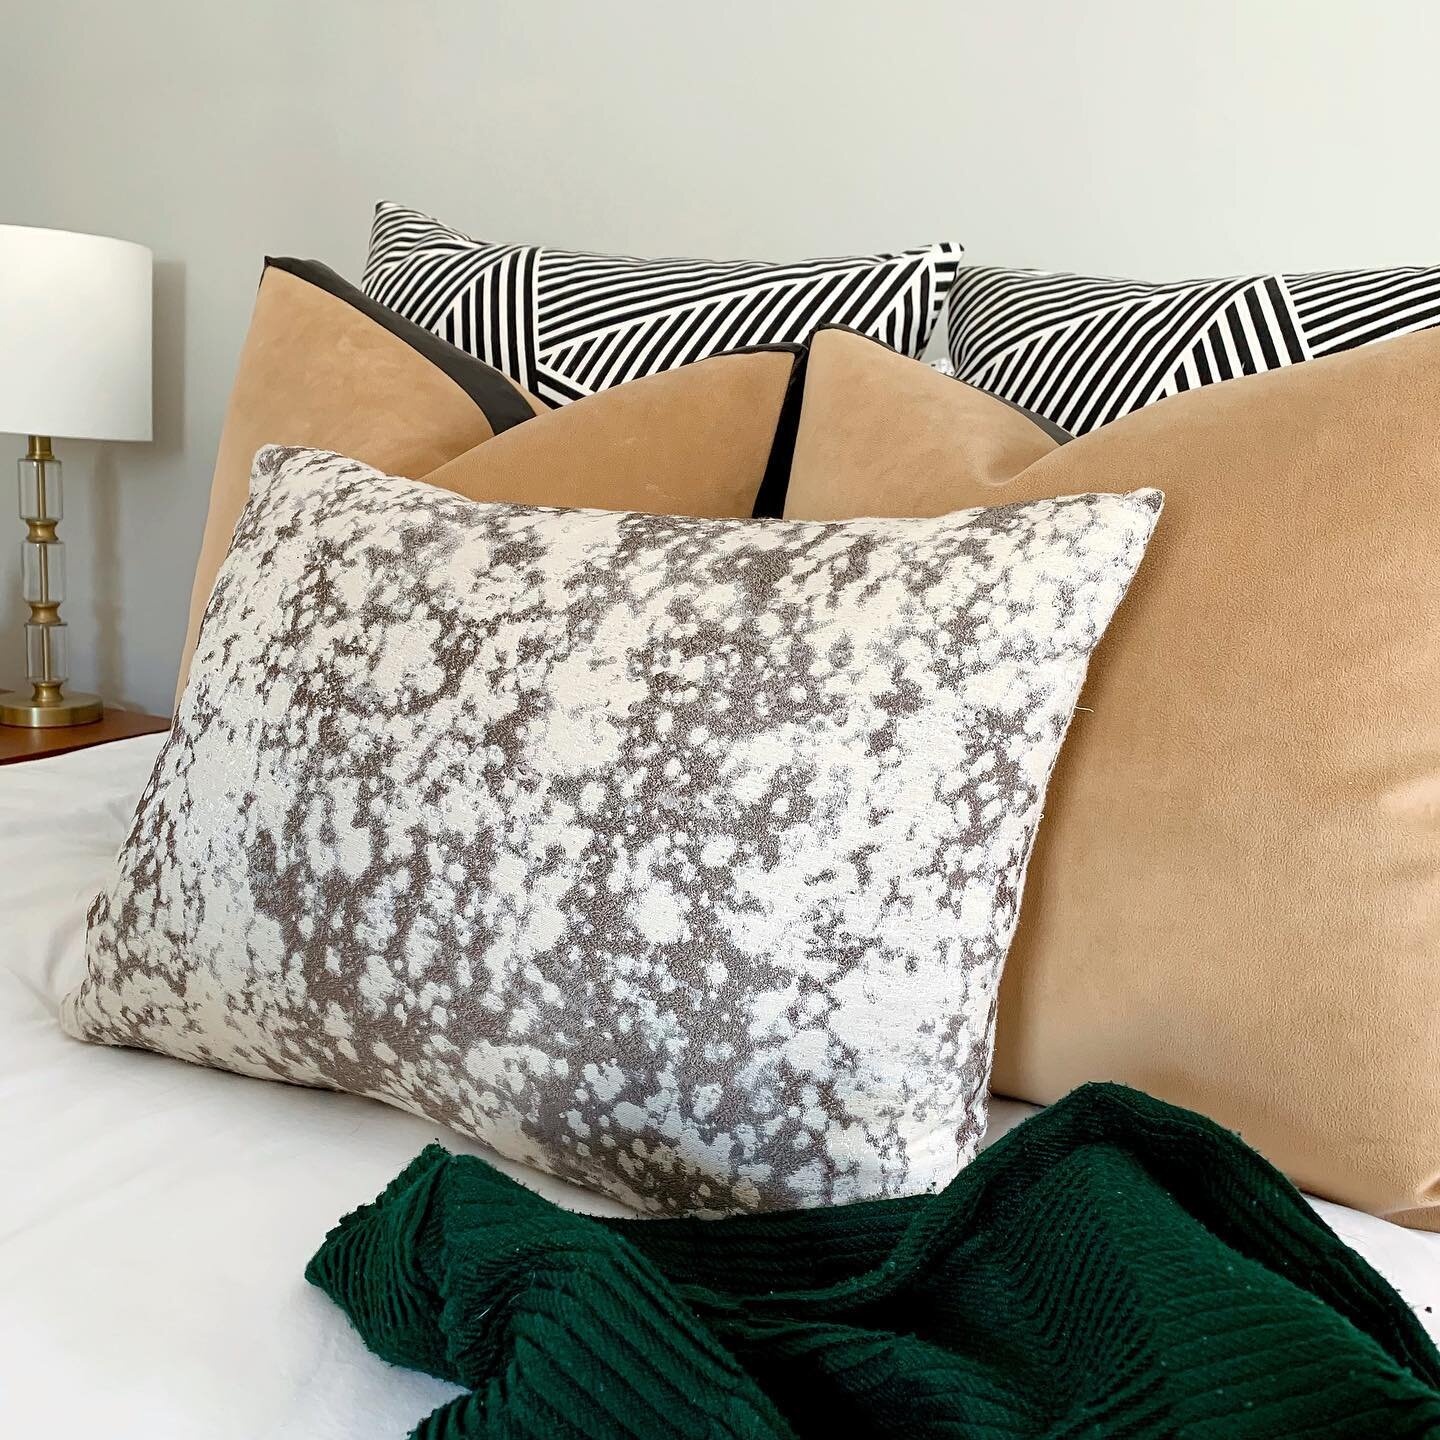 Finally added a Home Interior portion on The Brunette Blend! The first post is now live: $10 Bedding Trick to Make It Look 100%. Plus, showing off our bedding inspo and what we did get the same vibe since I&rsquo;m too much of a Libra to commit. 😇